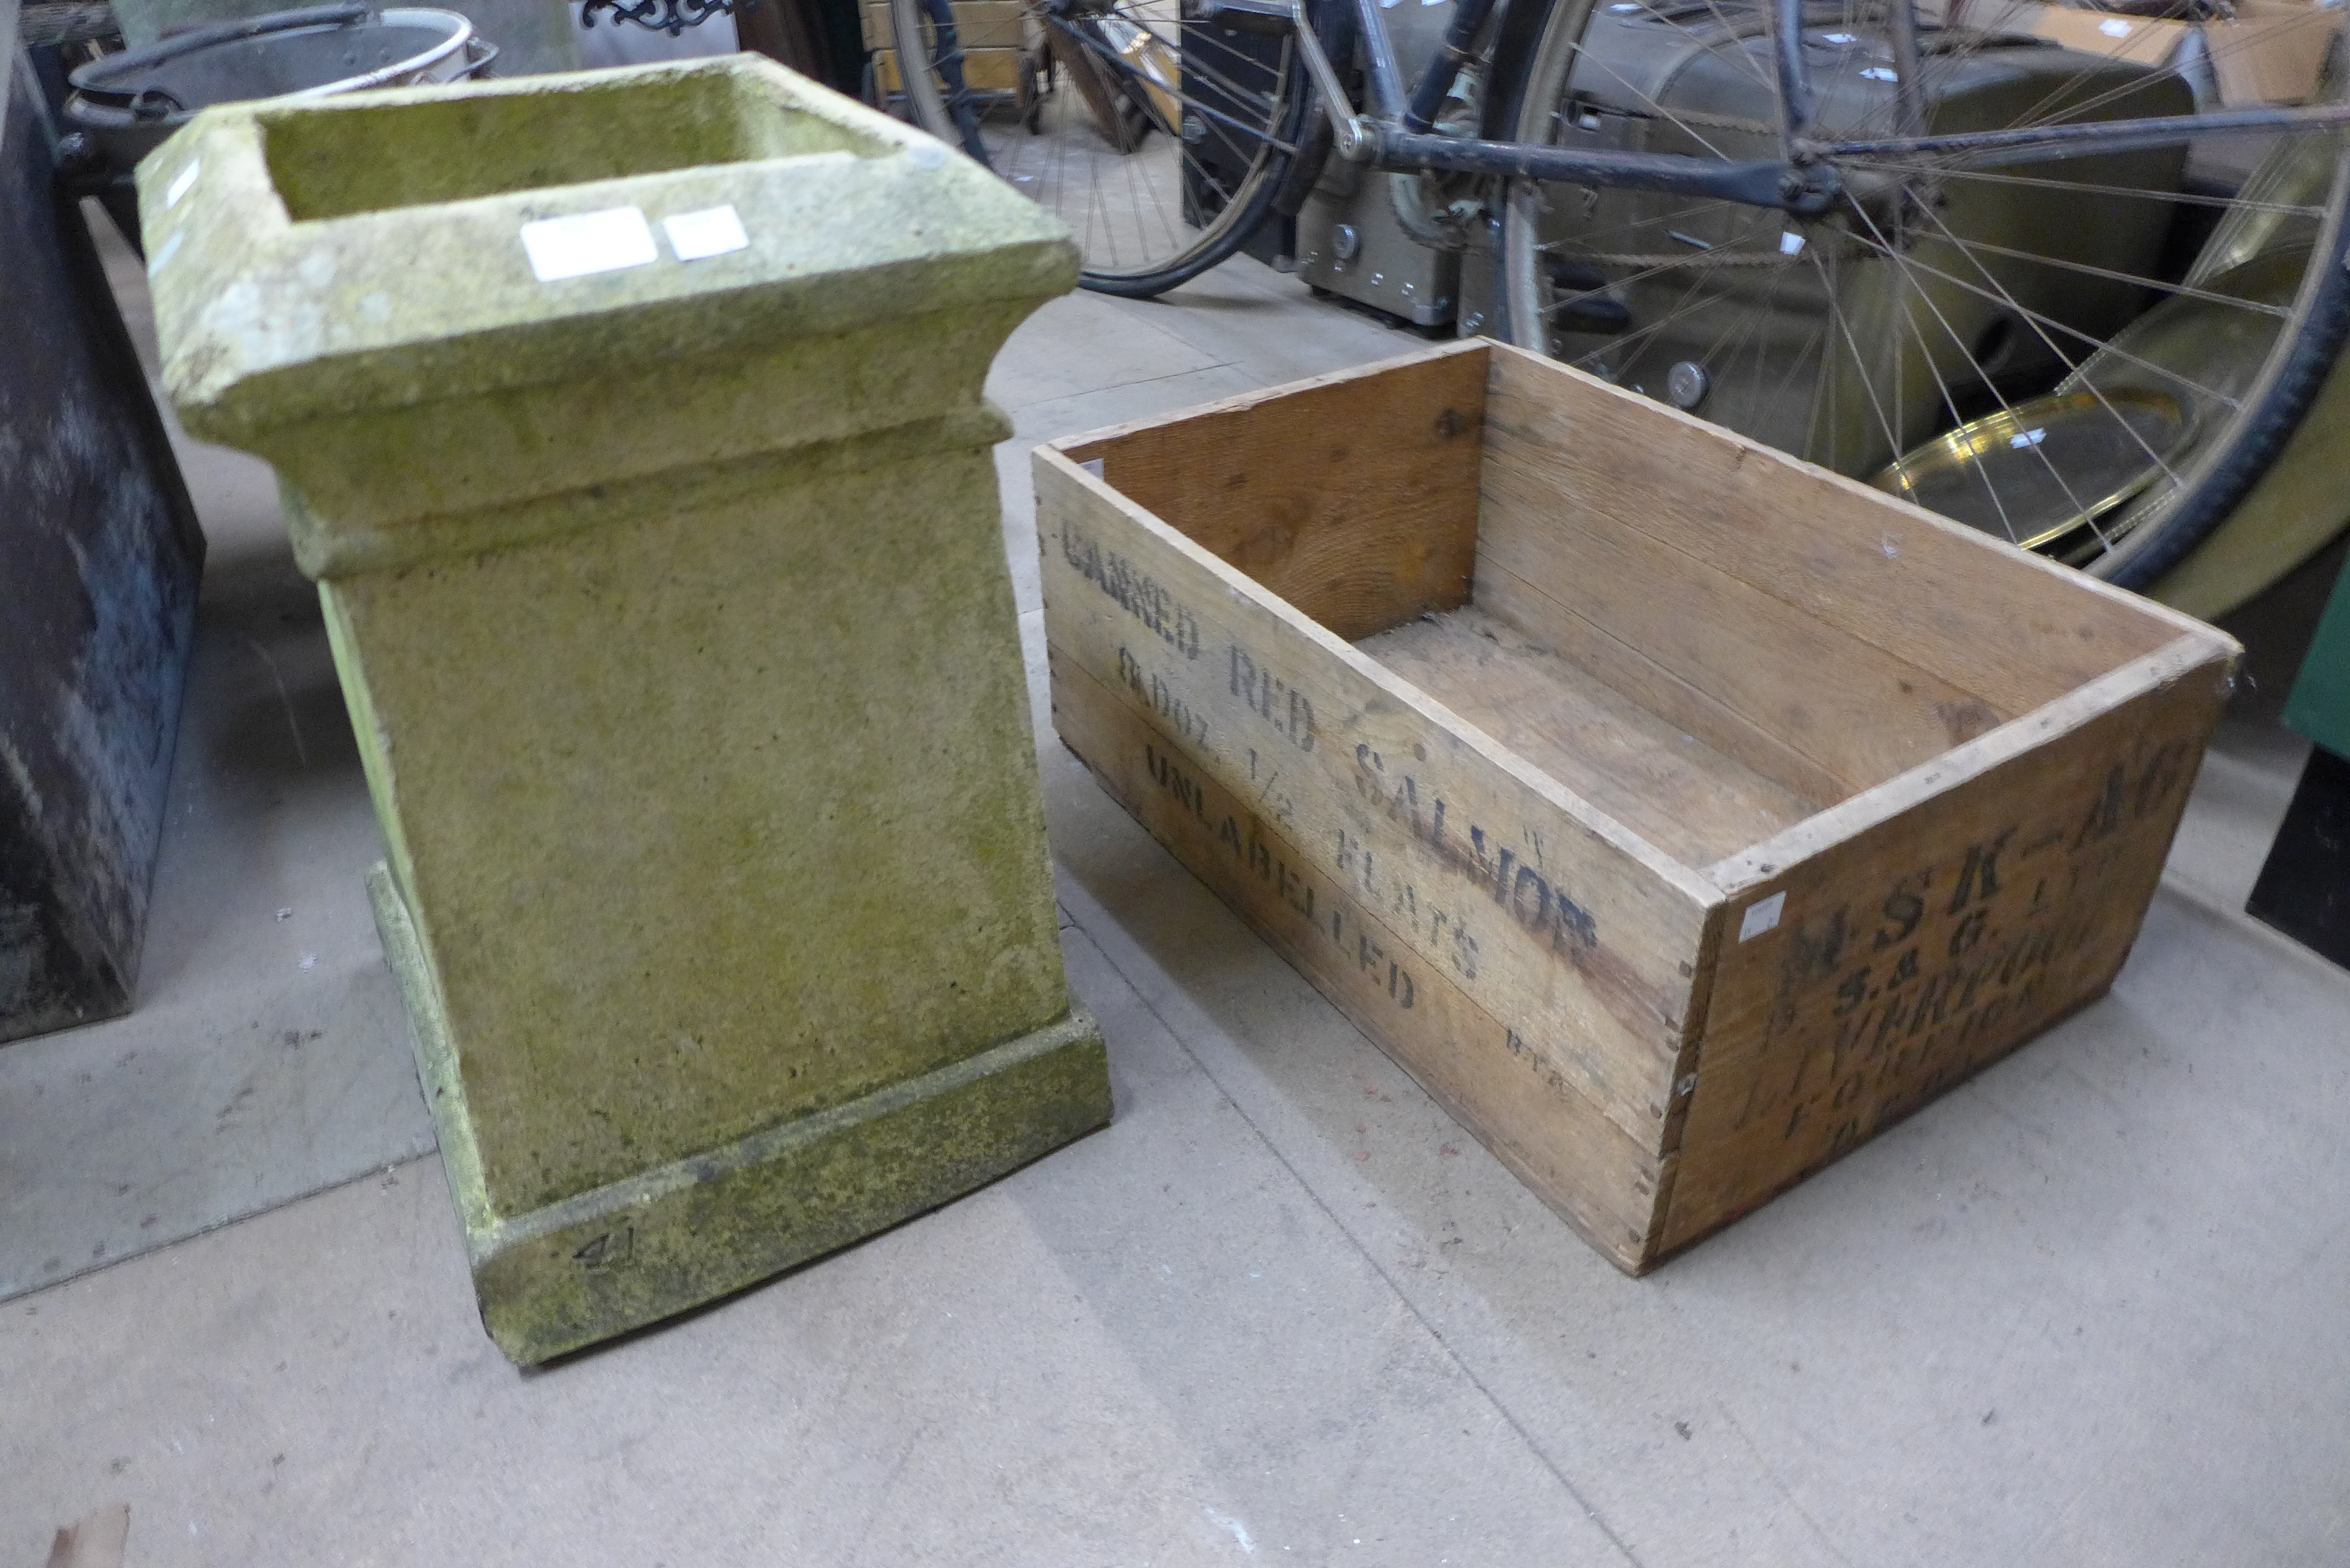 A concrete chimney pot and a wooden advertising crate